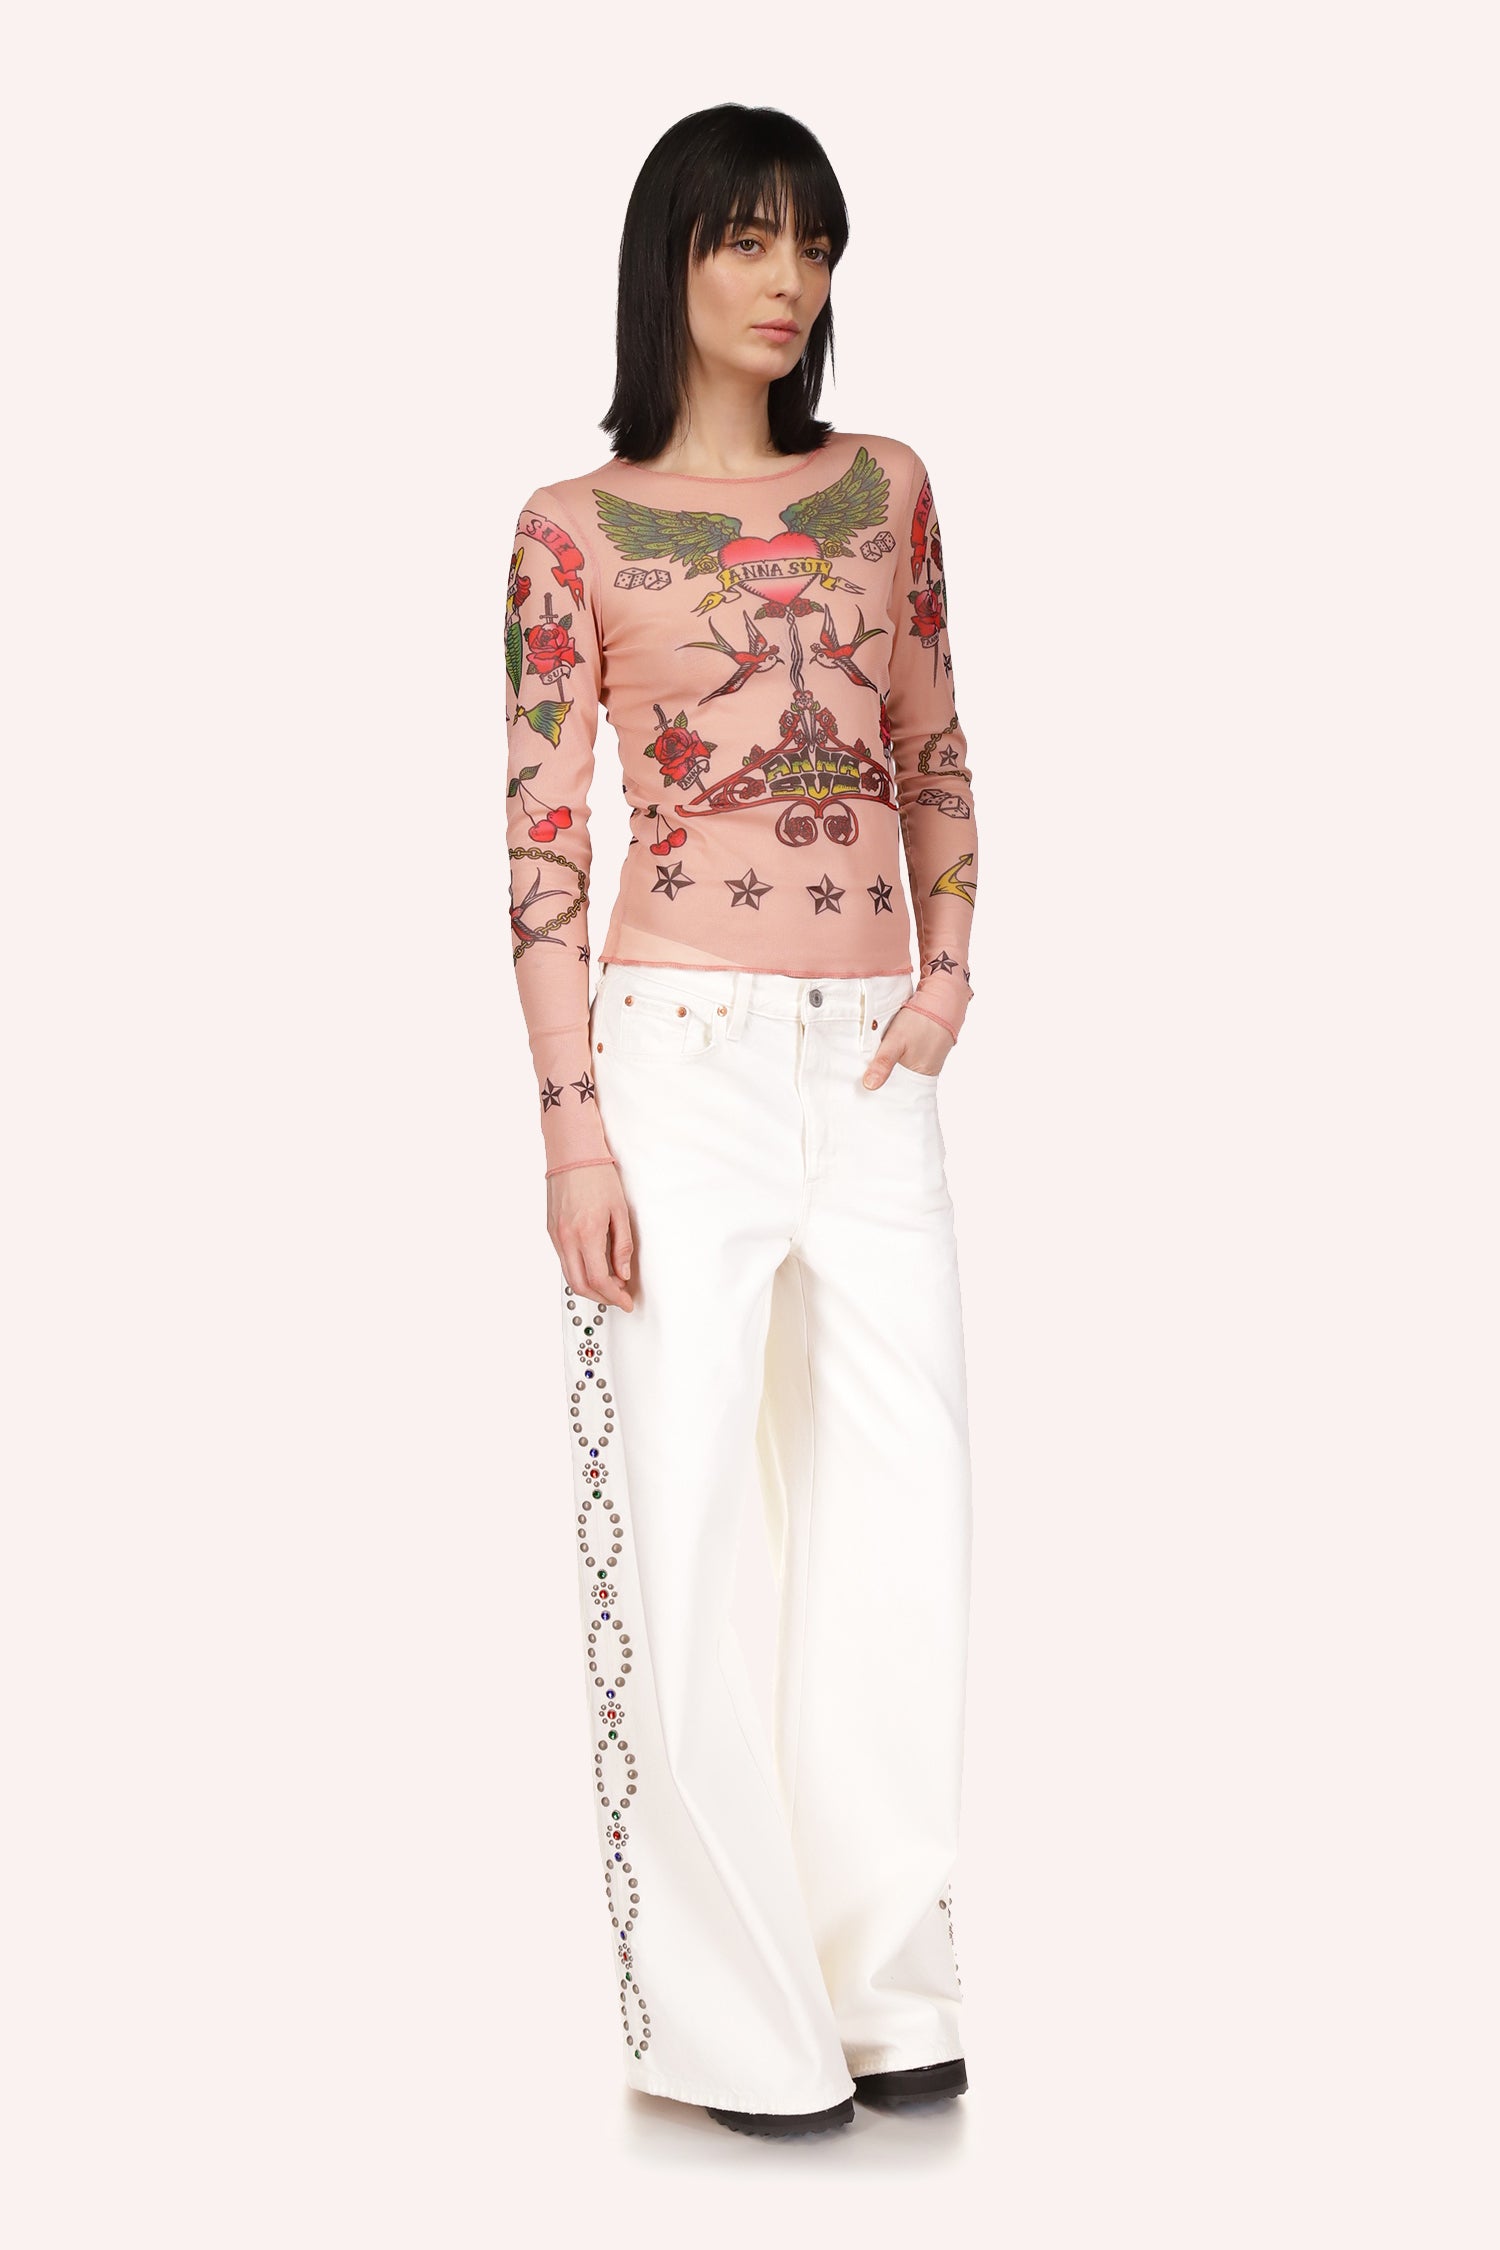 The Anna Sui Tattoo Mesh Top Nude Multi is with its long sleeves and tattoo-like patterns